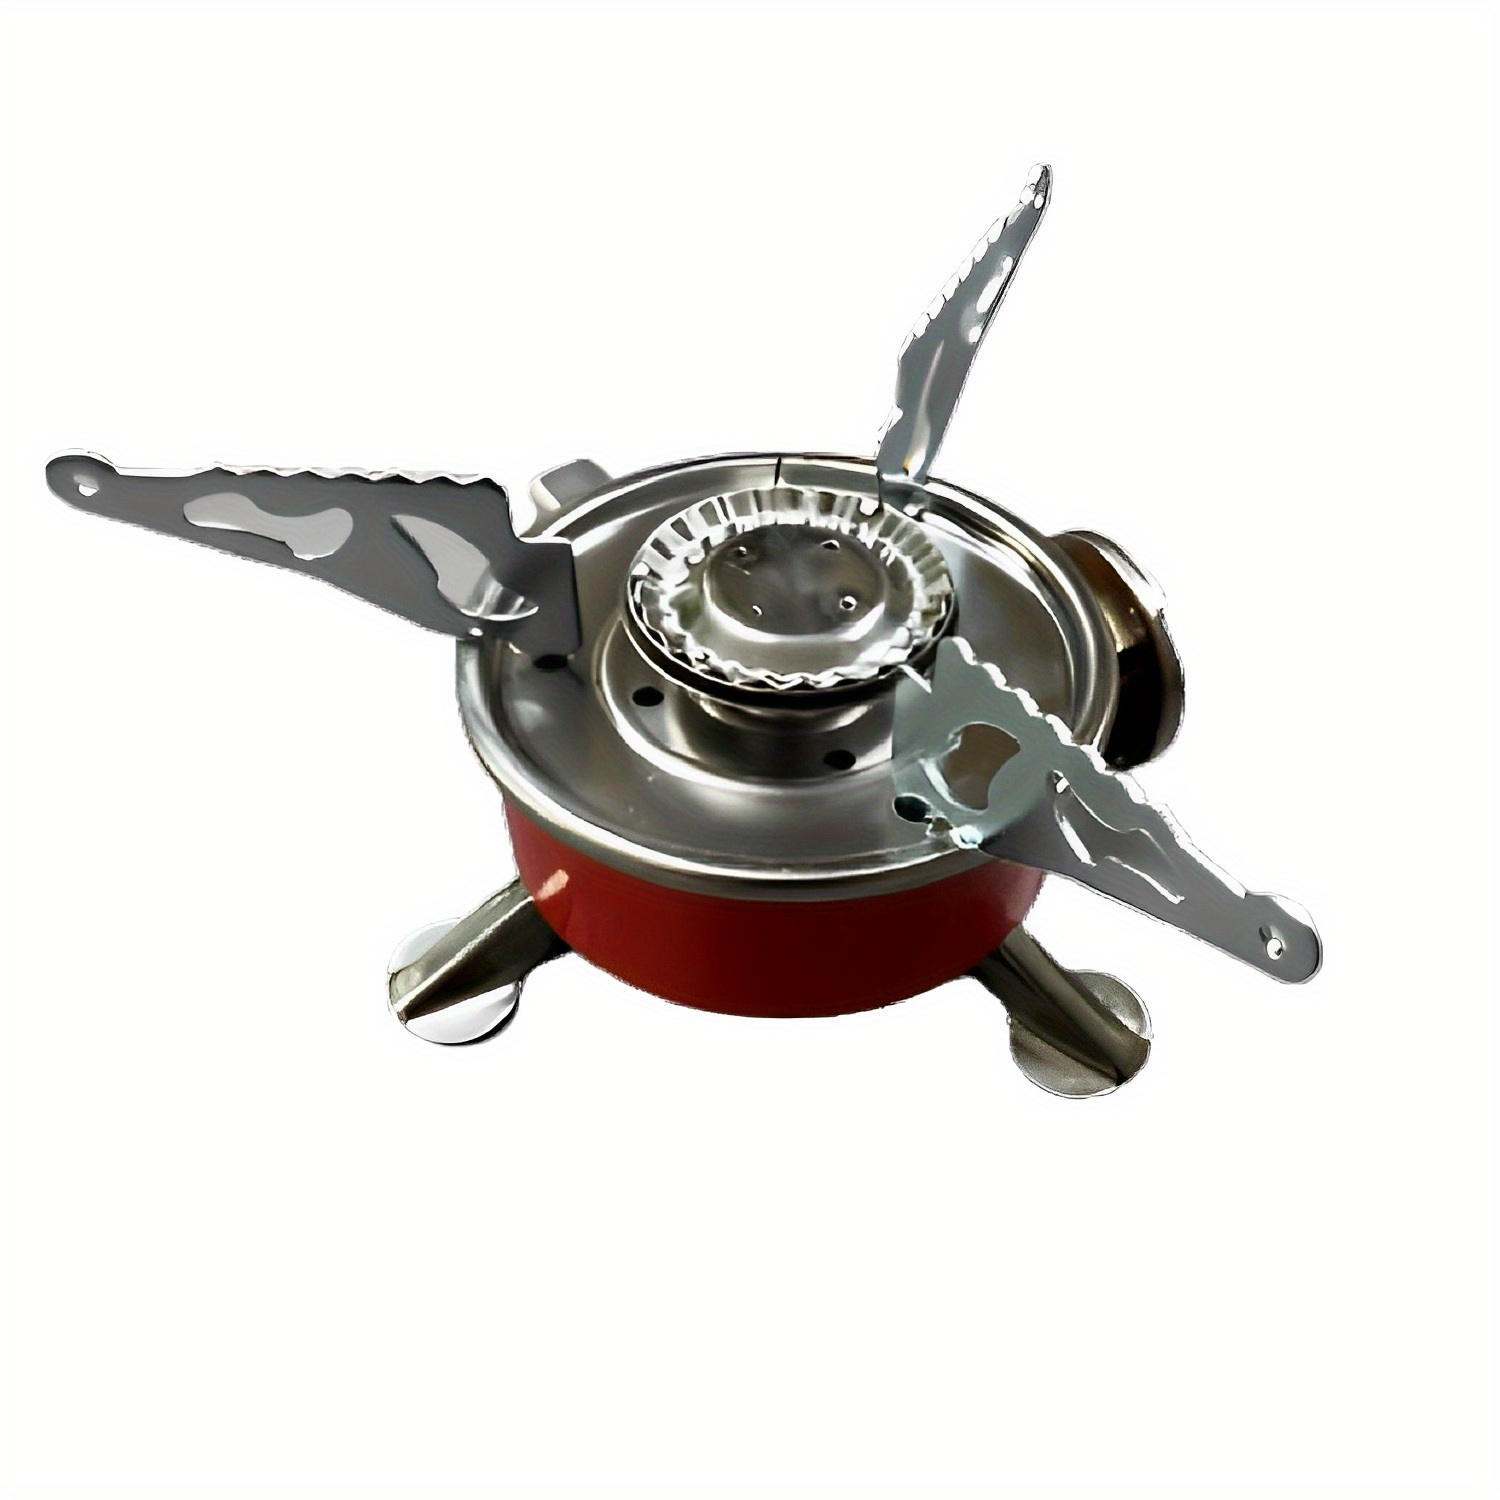 7000W High Power Camping Gas Stove 2 Burner Foldable Portable Outdoor  Tourist Gas Stove Windproof Strong Fire Burner Camp Hiking